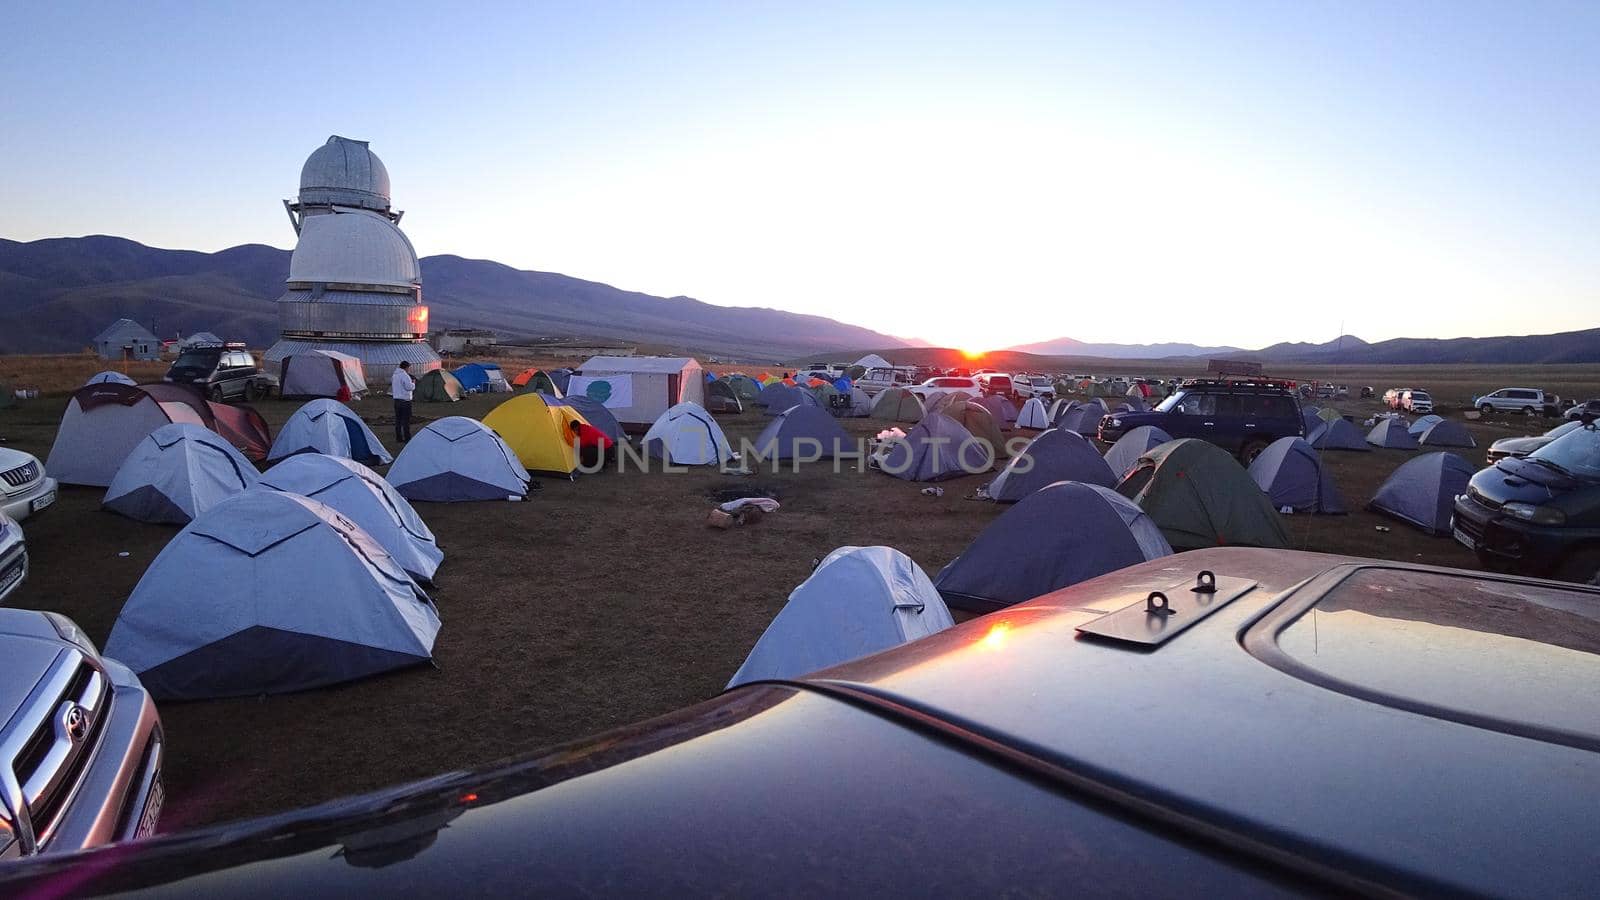 Sunrise over the camp near the Assi Observatory by Passcal